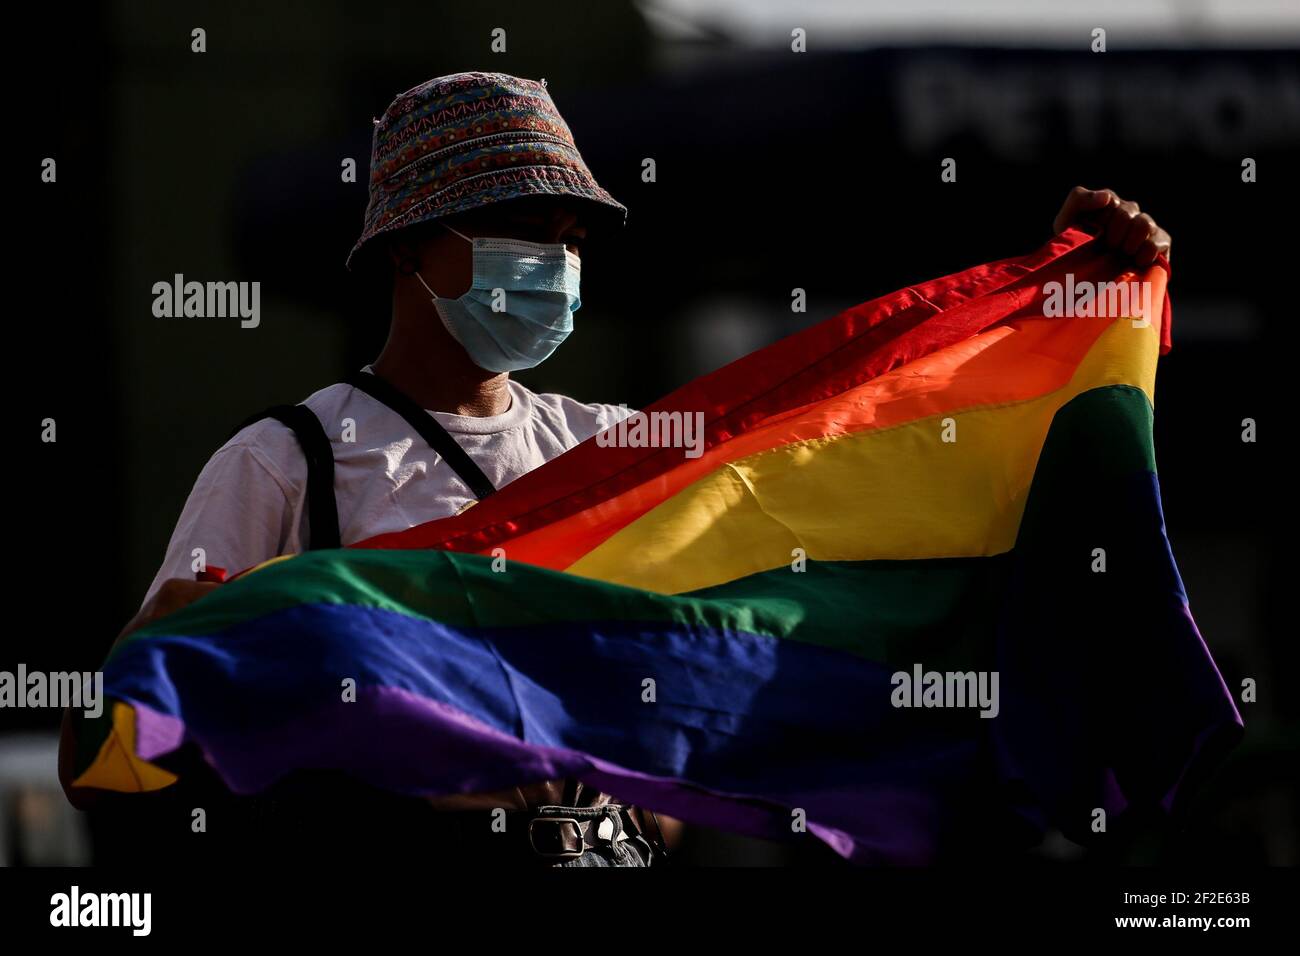 A woman holds a rainbow flag as members of an LGBT (Lesbians Gays Bisexual Transgender) group protest against the early release of US soldier Joseph Scott Pemberton at the Boy Scout Circle in Quezon City, Metro Manila, Philippines. Stock Photo